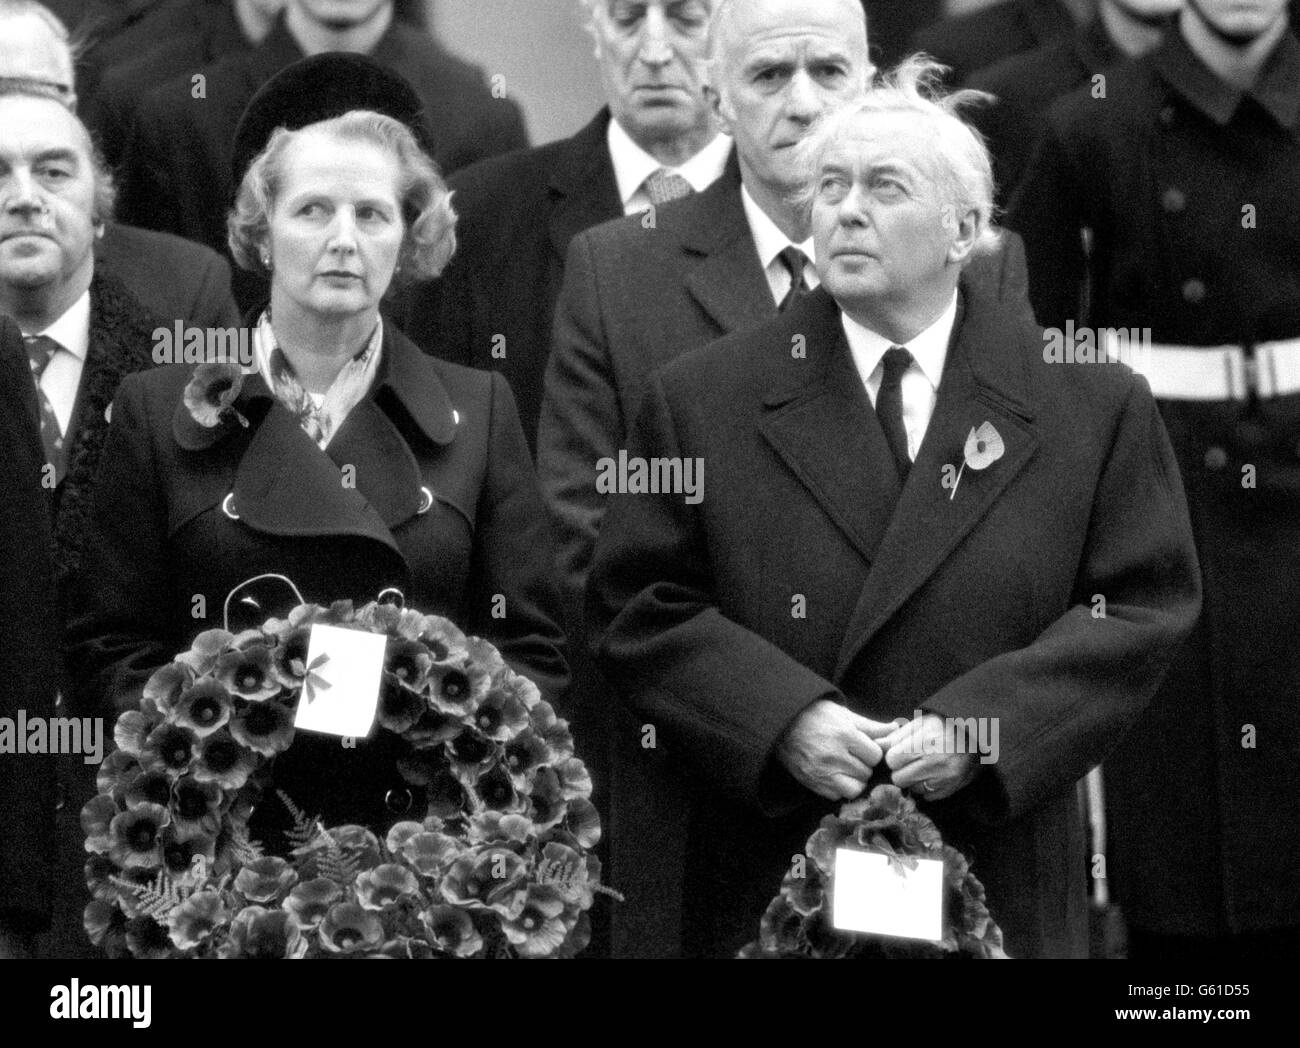 Adversaries in the political world, Leader of the Opposition, Mr Margaret Thatcher, and Prime Minister Mr Harold Wilson had a common purpose in Whitehall where they laid wreaths on the Cenotaph in memory of the dead of two world wars. Stock Photo